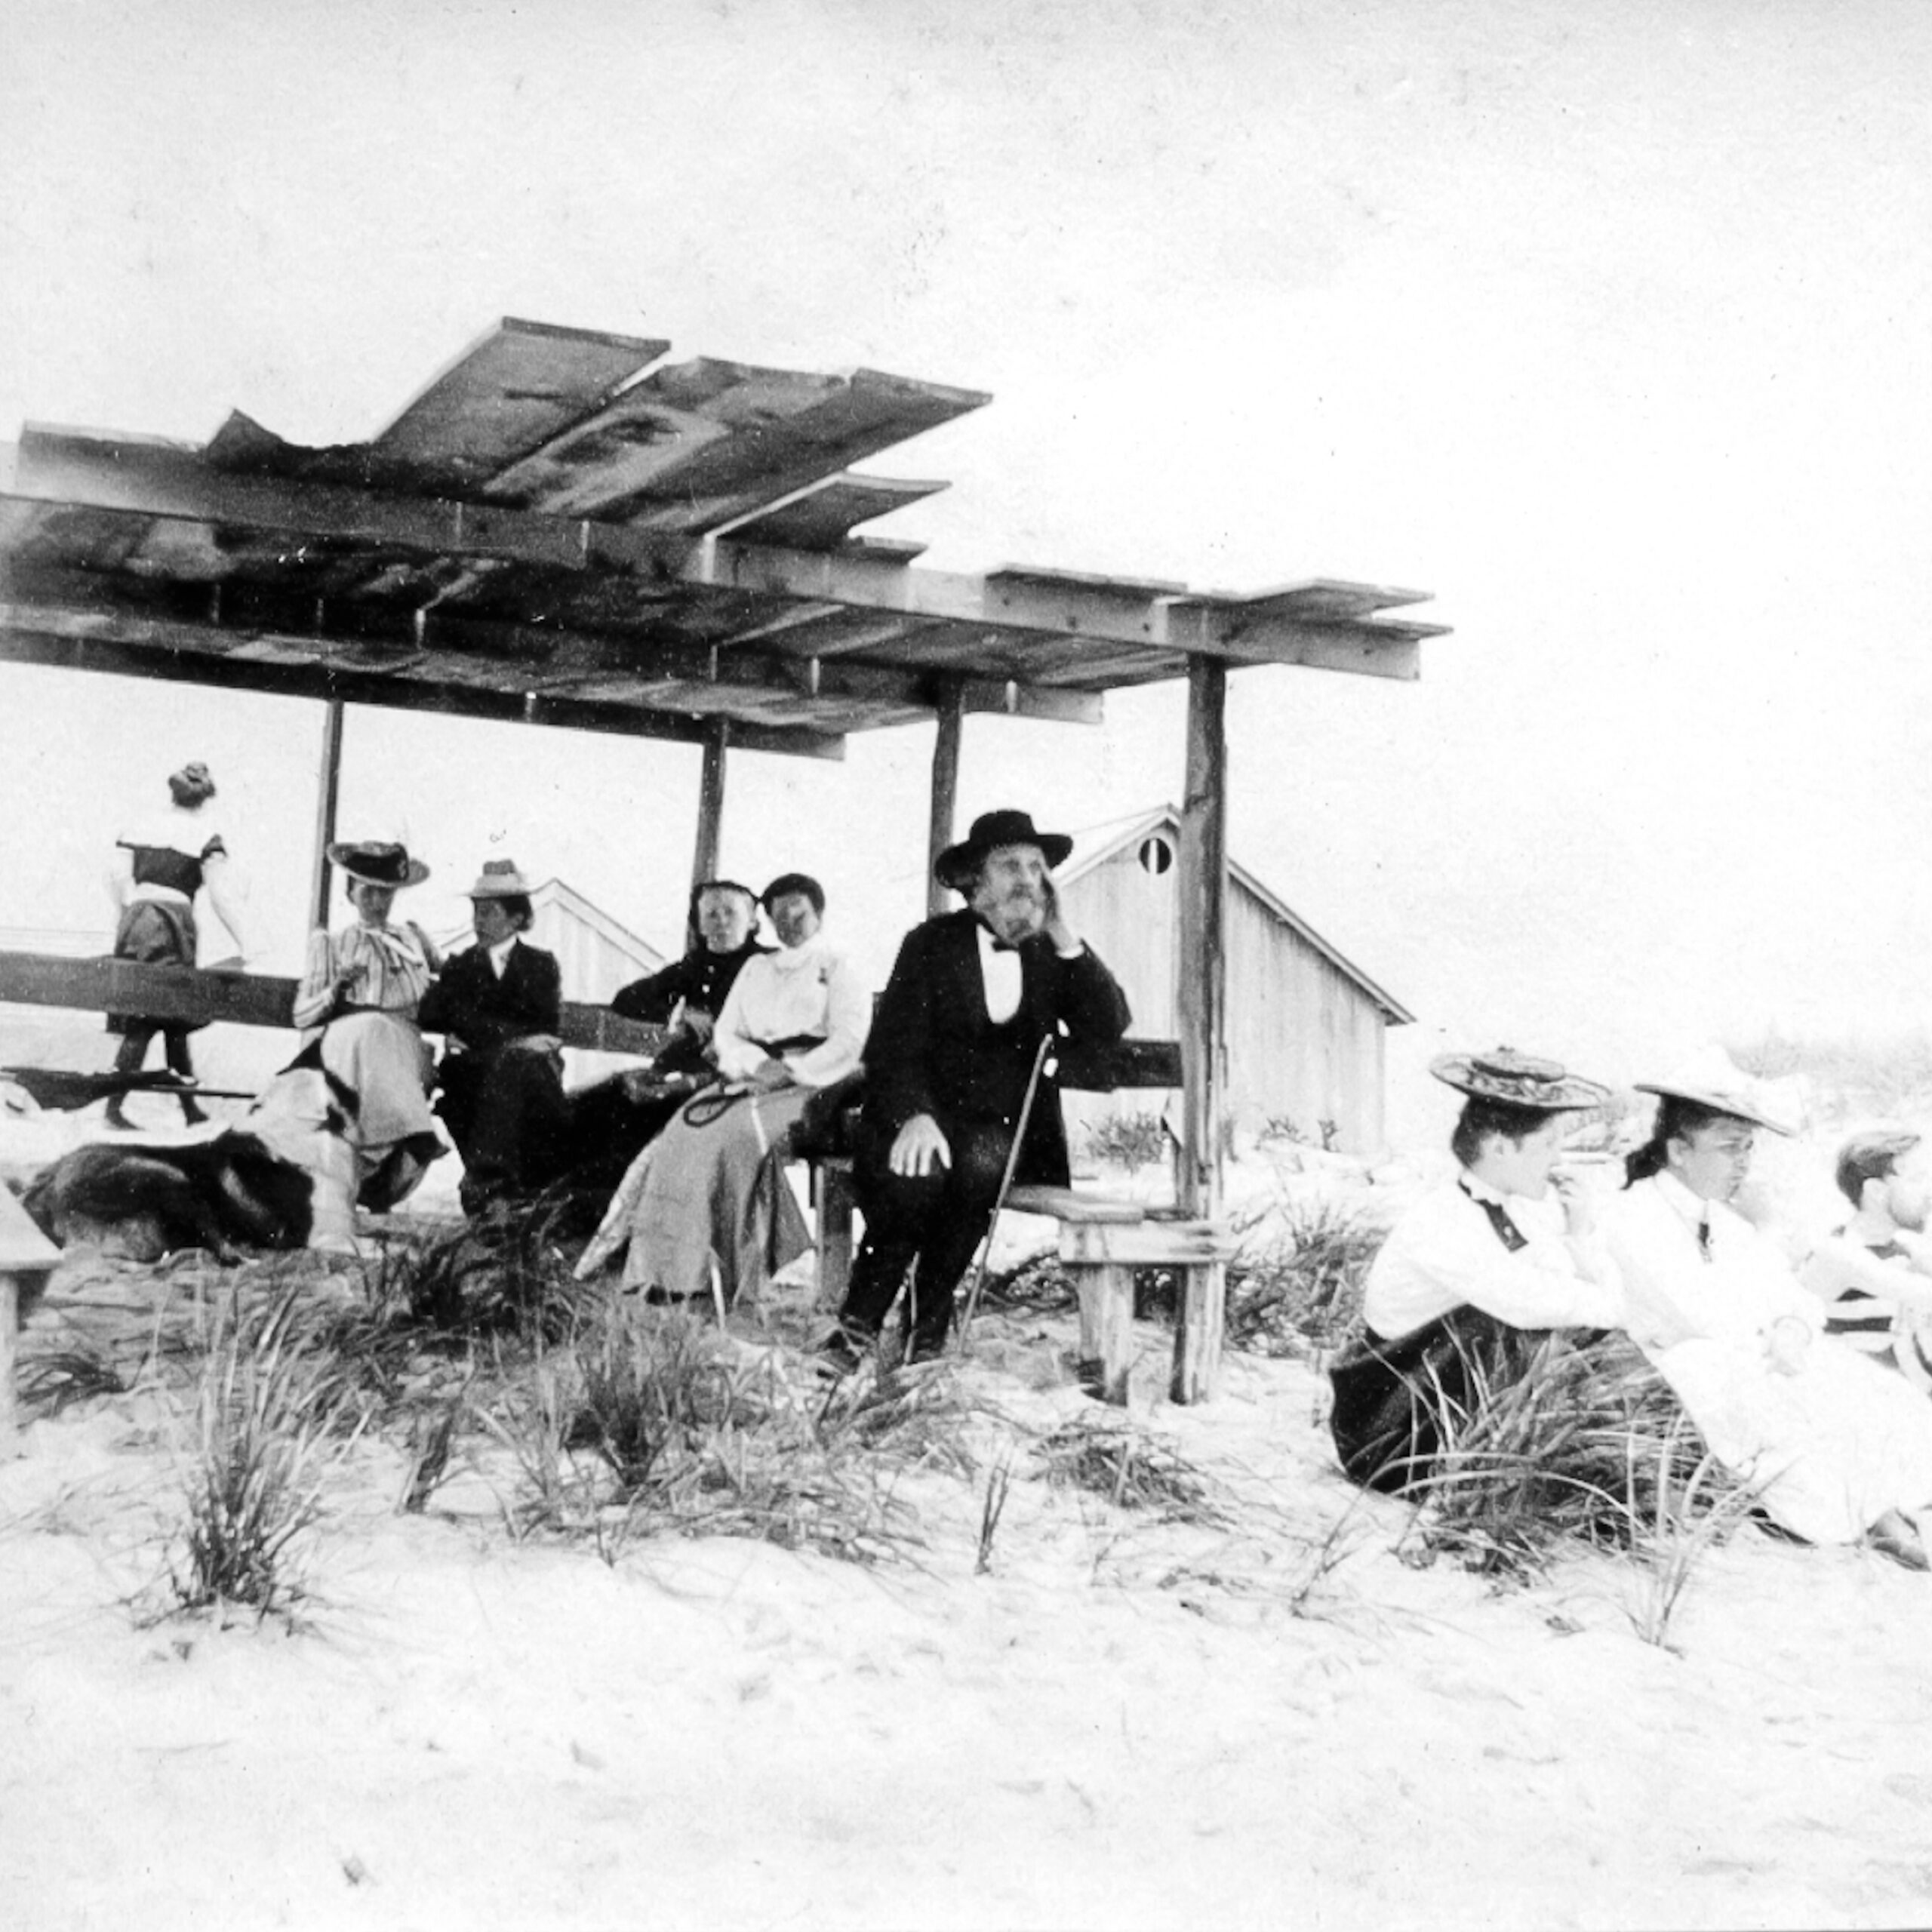 Hale and Weeden families at the beach, Matunuck, 1902. (Smith/Weeden Family Collection)